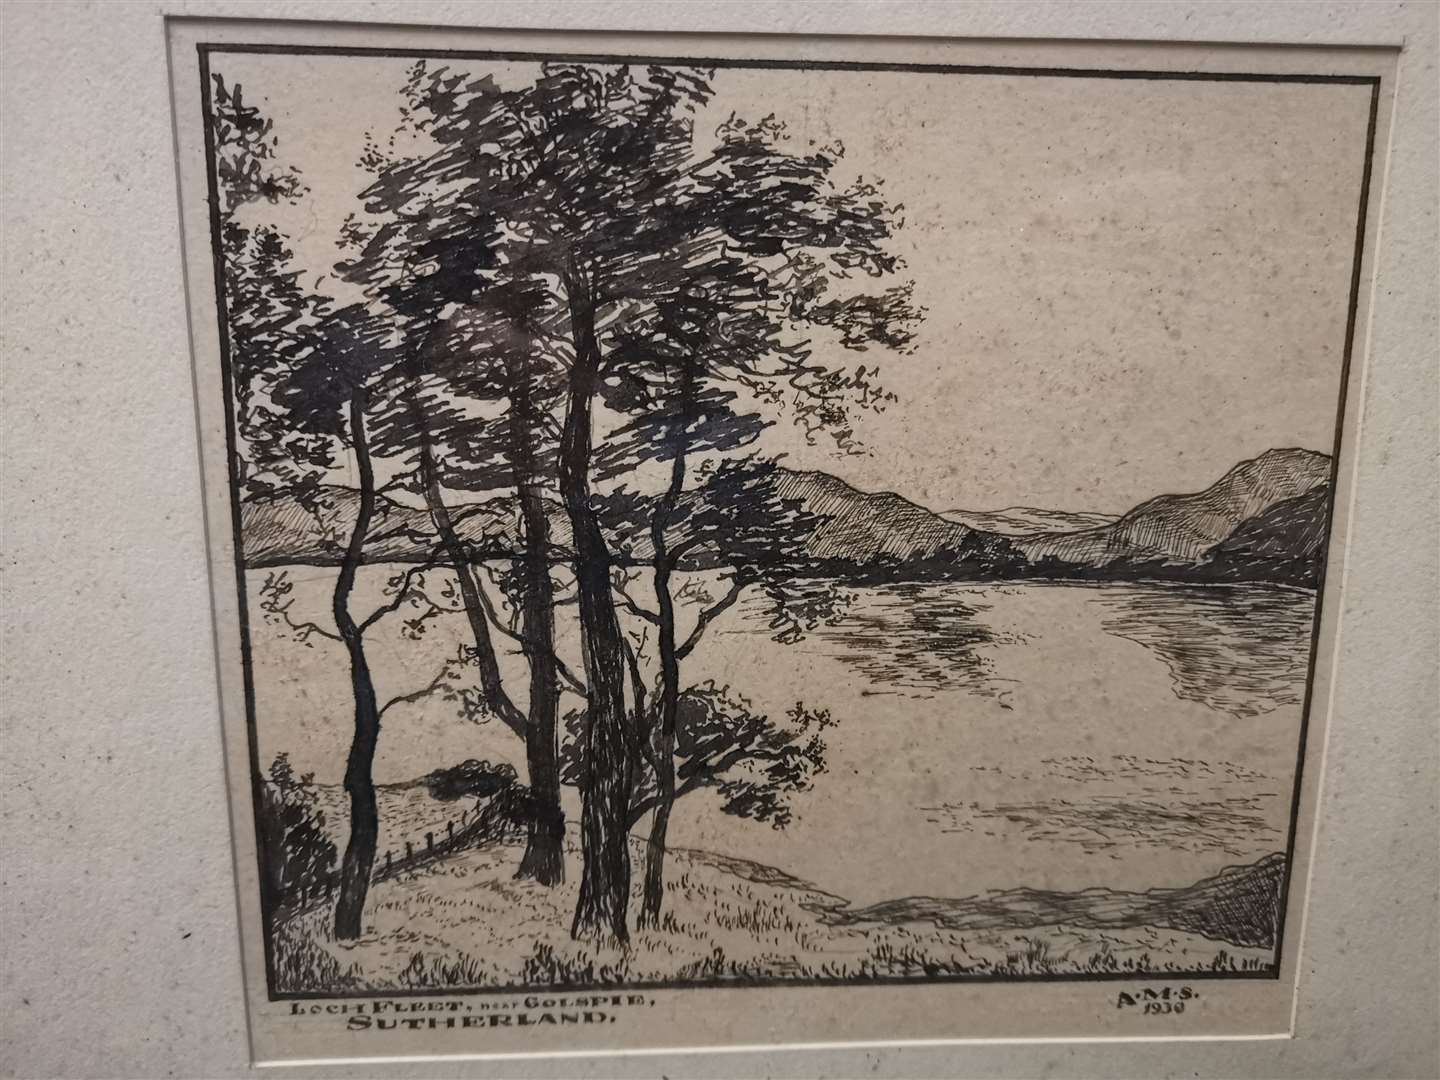 The ink drawing is dated 1930 and signed ‘AMS’.